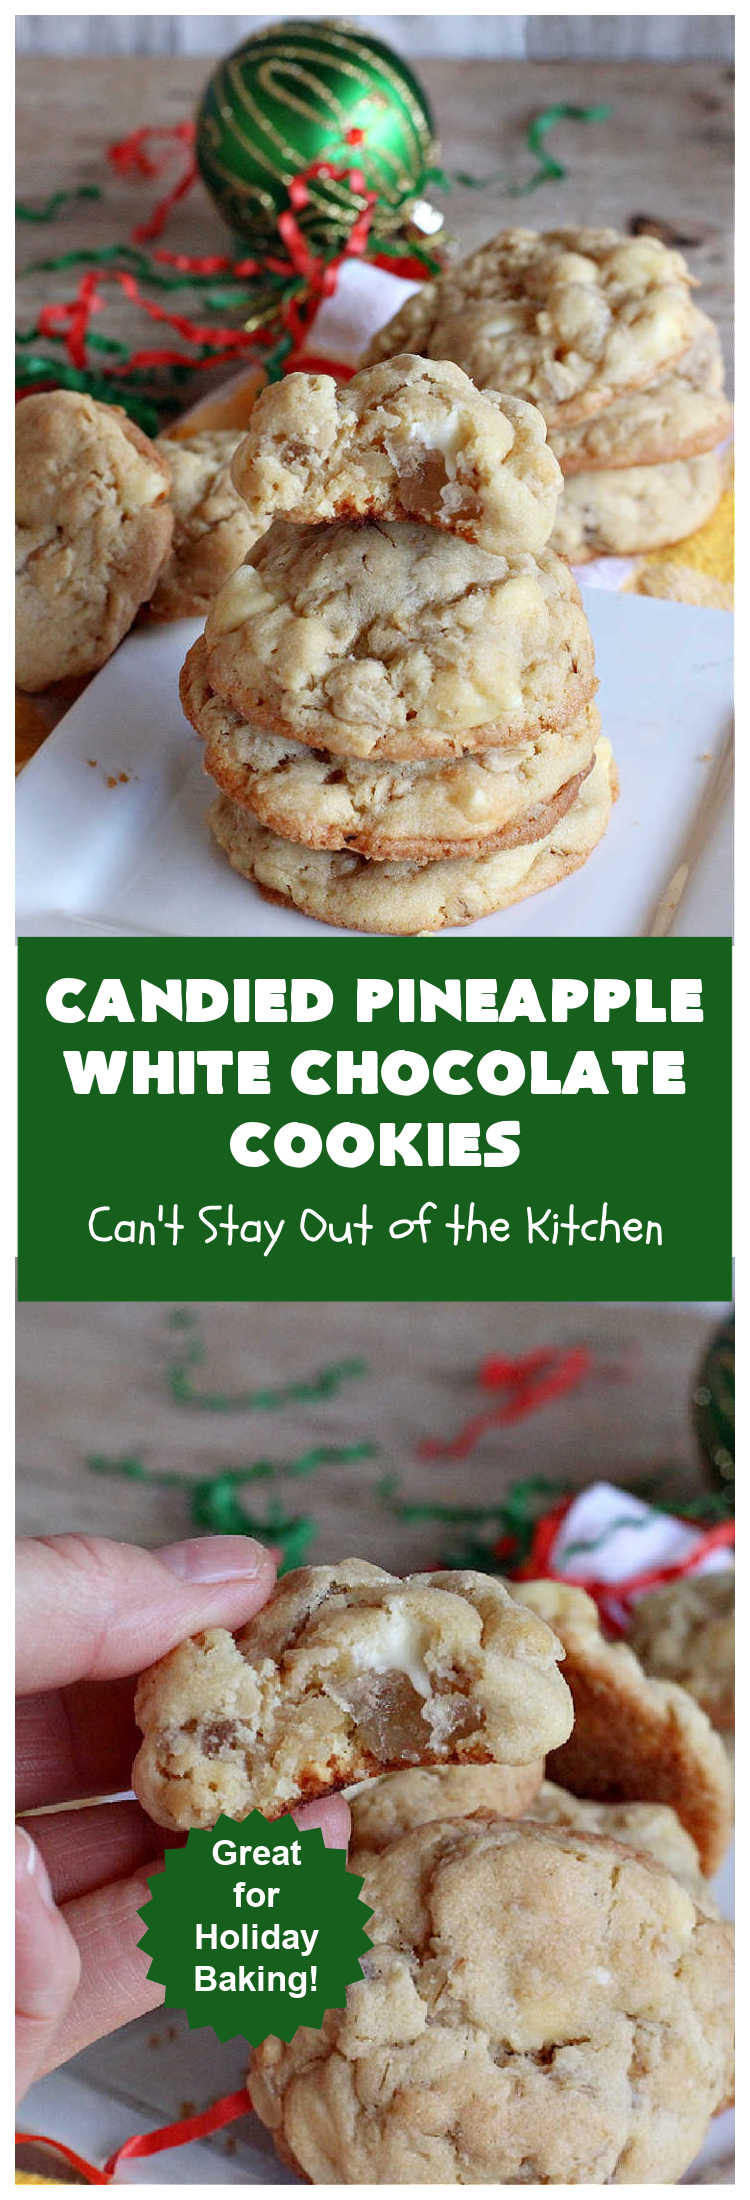 Candied Pineapple White Chocolate Cookies | these delightful #OatmealCookies include #CandiedPineapple & #WhiteChocolateChips for a robust flavor that will knock your socks off! Terrific for #holiday or #tailgating parties or a #ChristmasCookieExchange. #cookies #ParadiseCandiedFruit #chocolate #ParadiseFruitCompany #pineapple #holiday #dessert #HolidayDessert #HolidayBaking #Christmas #Thanksgiving #NewYearsDay #CandiedPineappleWhiteChocolateCookies